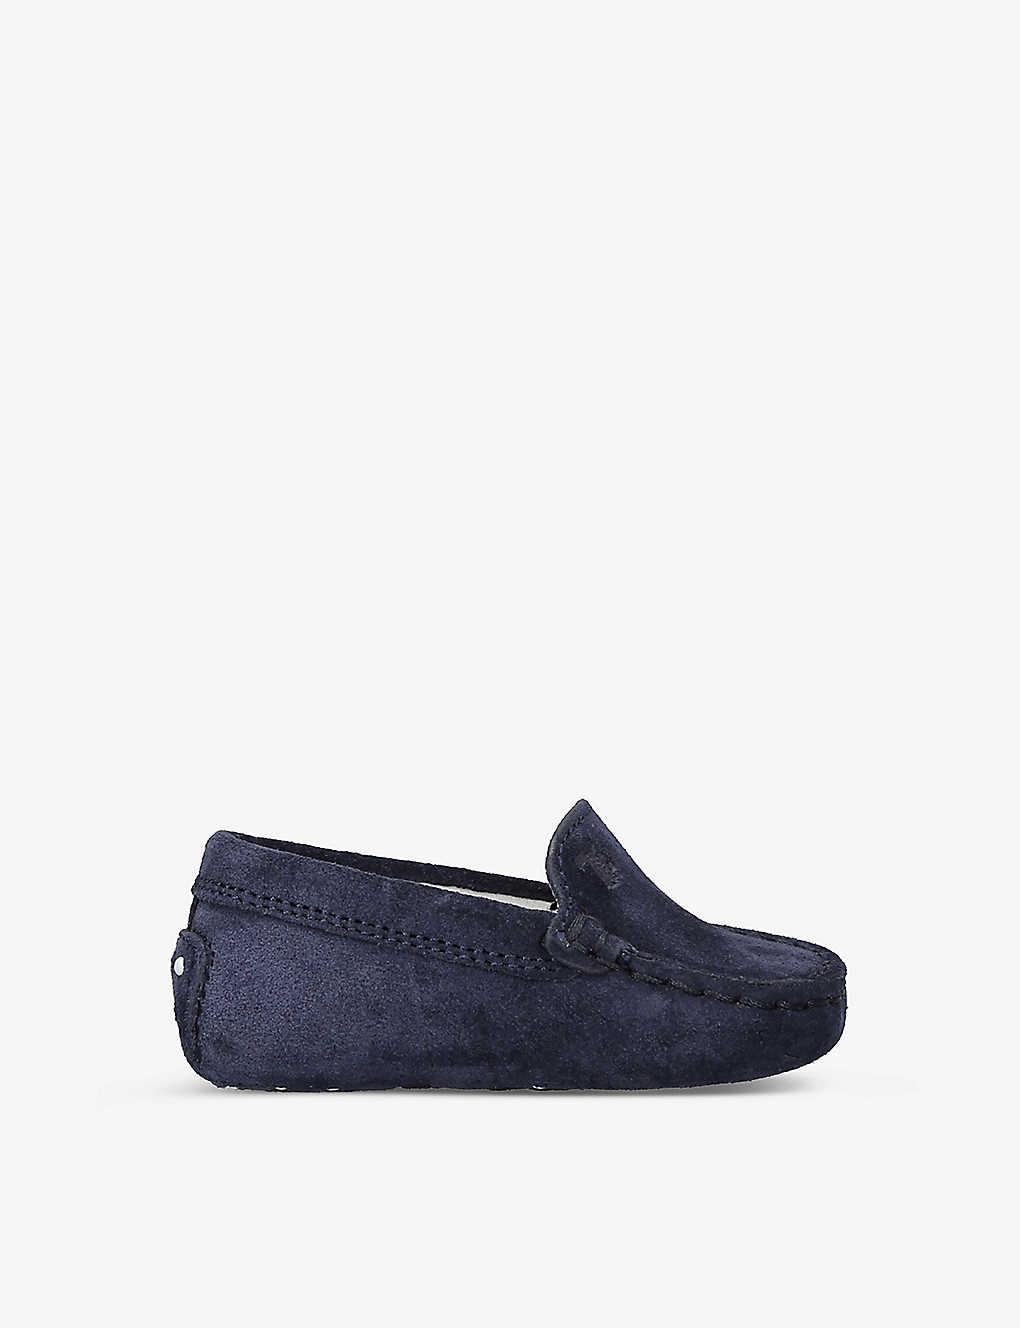 Tod's Babies' Tods Navy Pantofola Gommini Suede Driving Shoes 6-12 Months